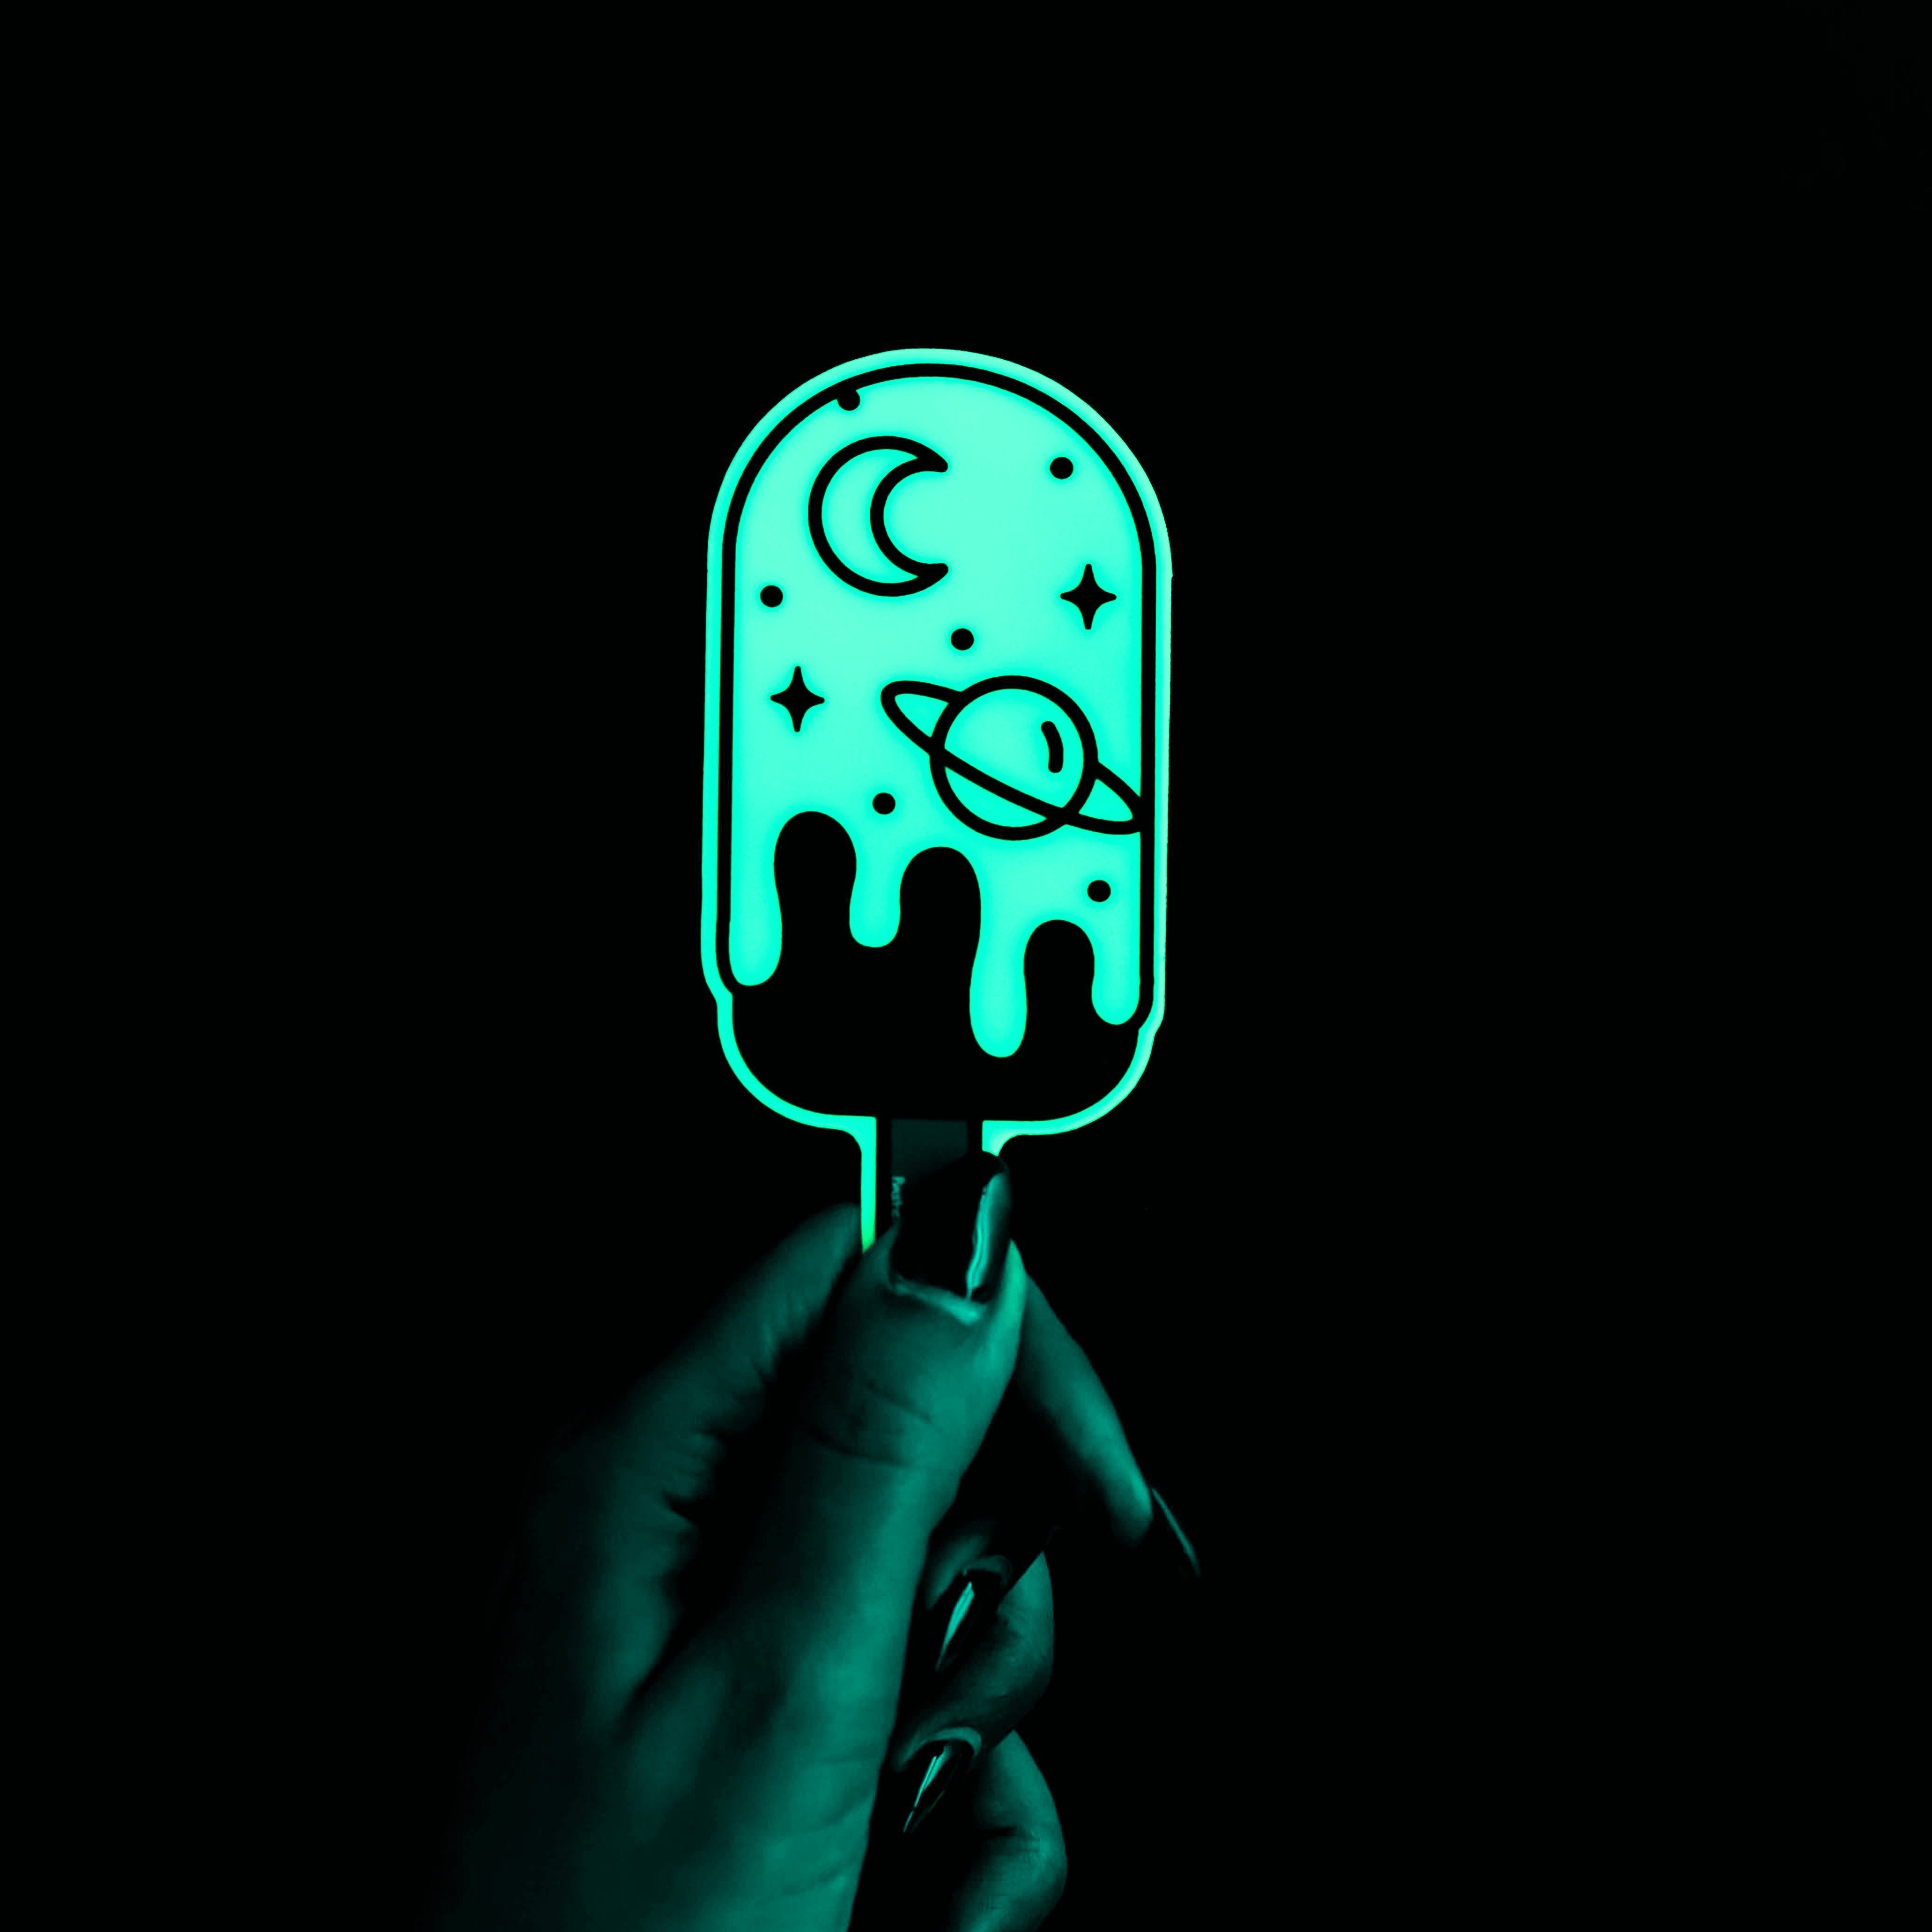 Glow in the Dark HTV - Limited Time Product! – Sticky Fingers